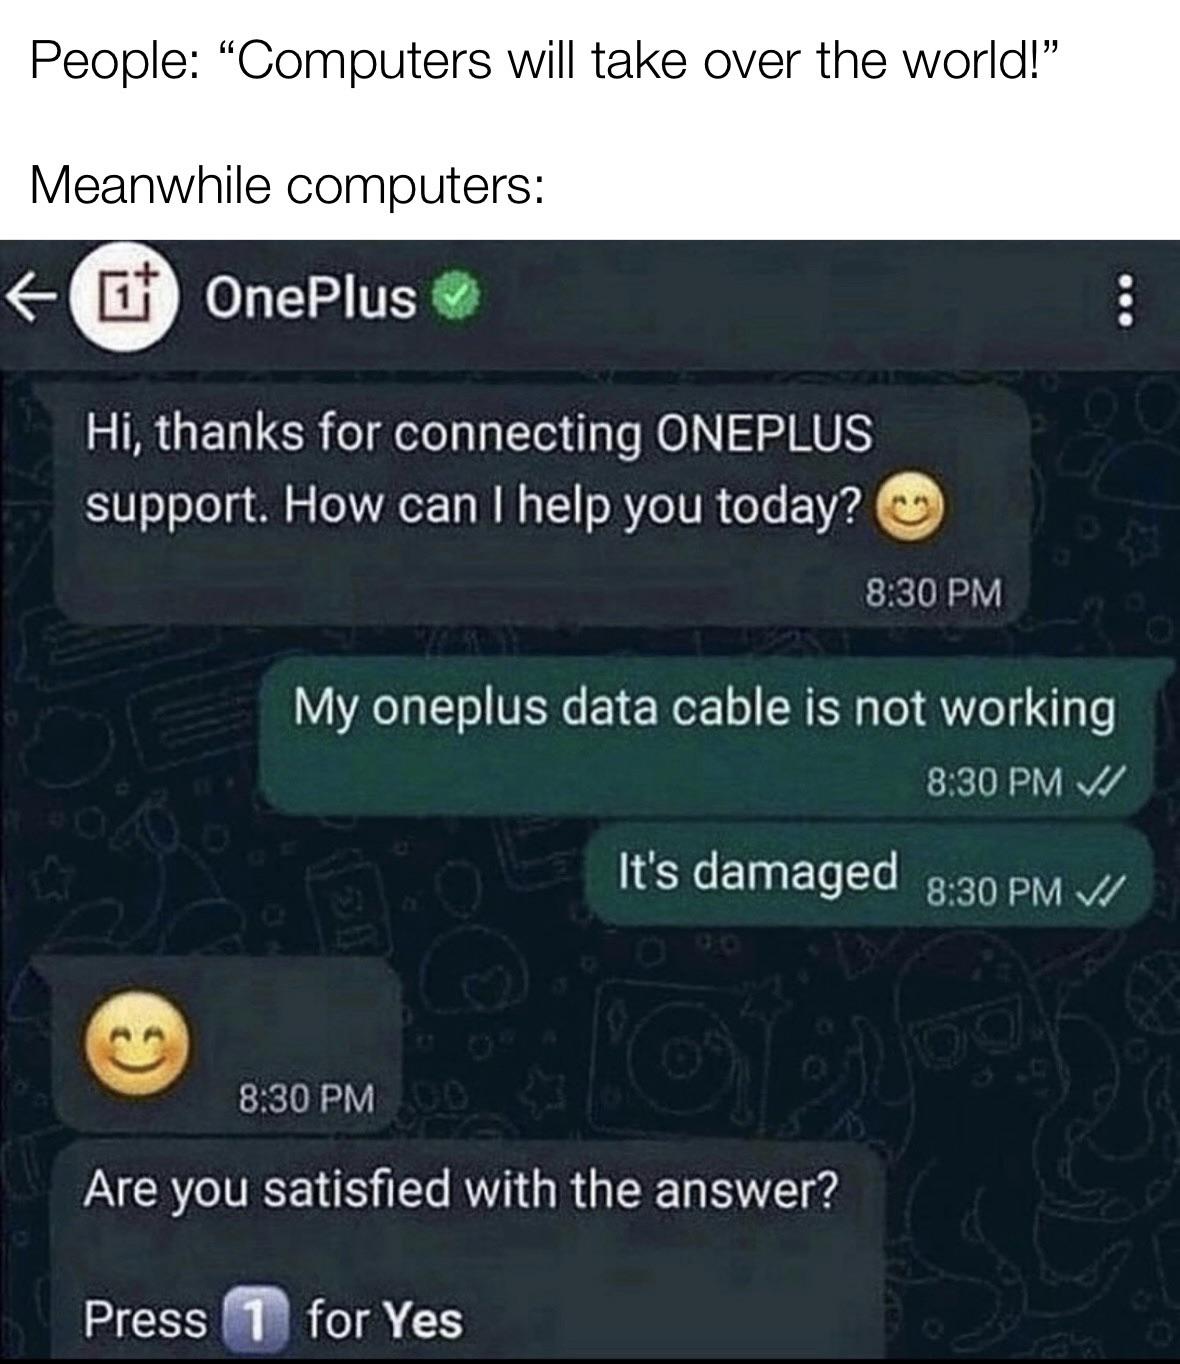 funny gaming memes --  software - People Computers will take over the world! Meanwhile computers 6 OnePlus Hi, thanks for connecting Oneplus support. How can I help you today? My oneplus data cable is not working ol v It's damaged V! Are you satisfied wit